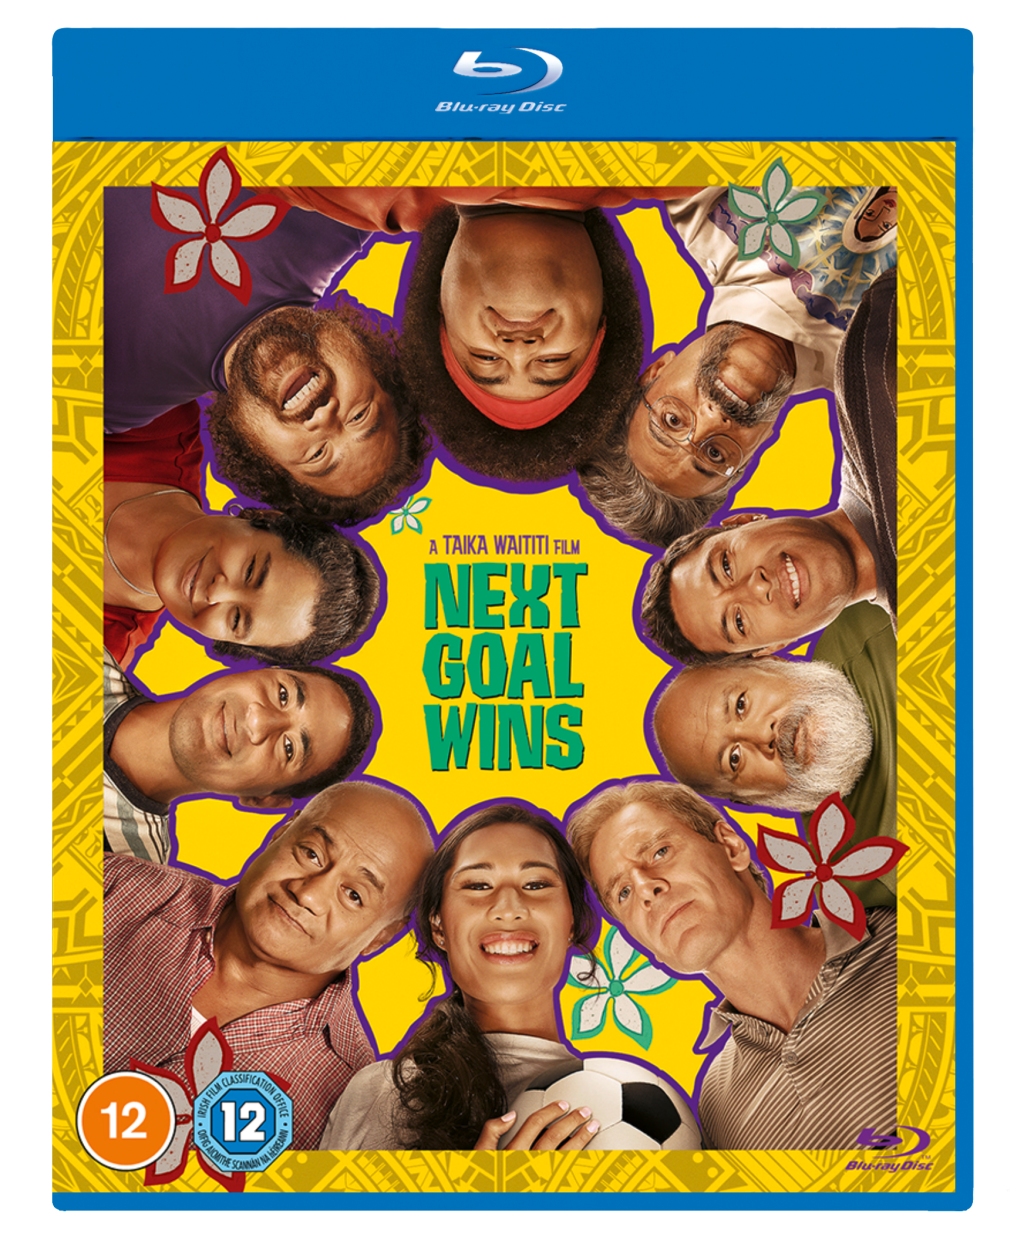 Win Next Goal Wins, starring Michael Fassbender, on Blu-ray! **COMPETITION CLOSED**